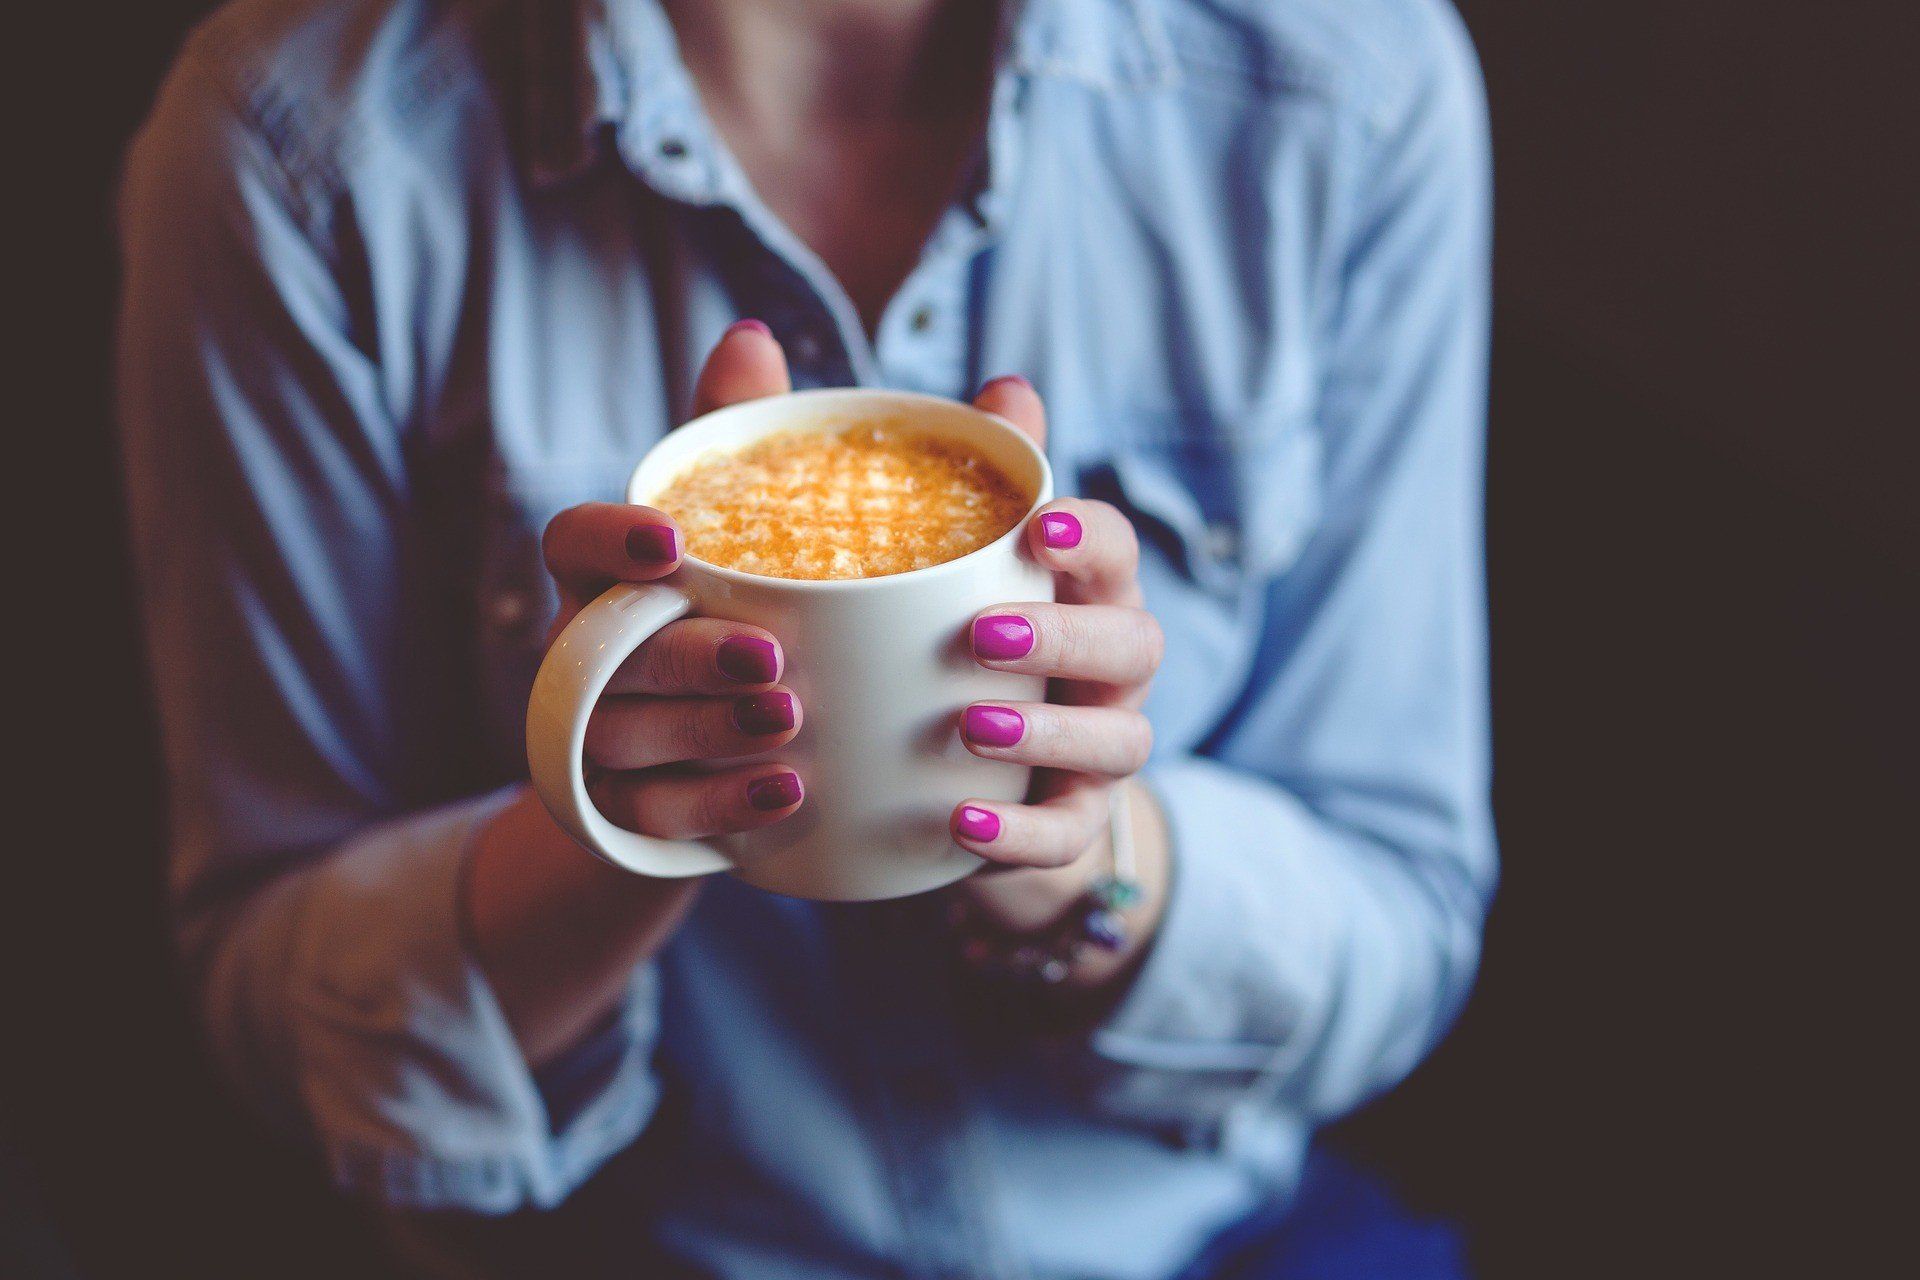 Woman with beautiful nails holding a cup of coffee